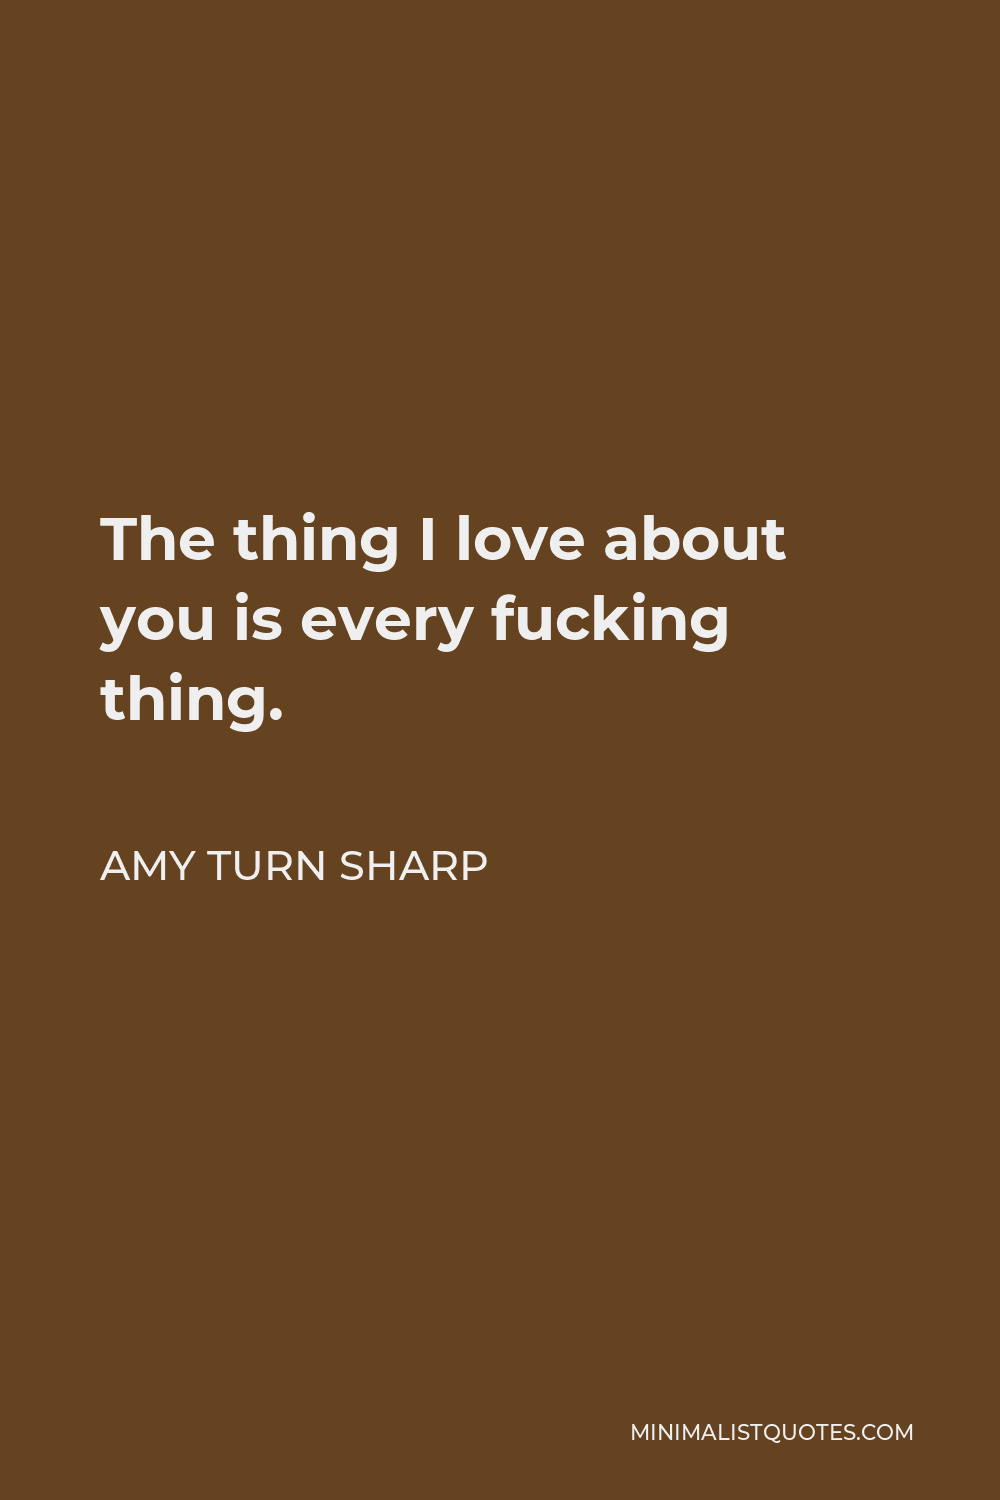 Amy Turn Sharp Quote - The thing I love about you is every fucking thing.